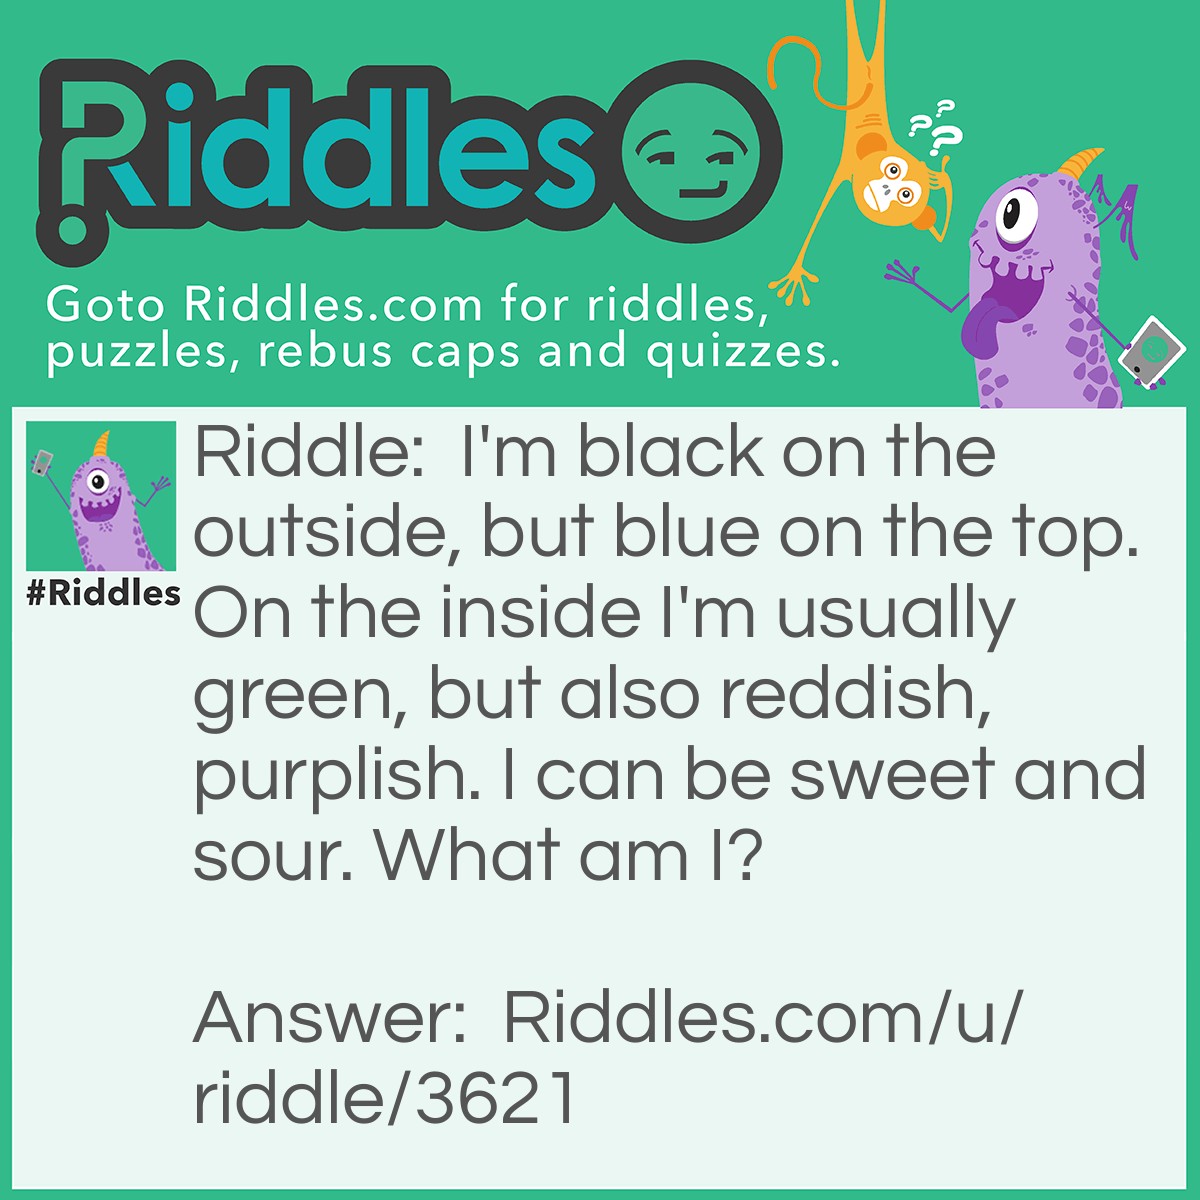 Riddle: I'm black on the outside, but blue on the top. On the inside I'm usually green, but also reddish, purplish. I can be sweet and sour. What am I? Answer: A blueberry.